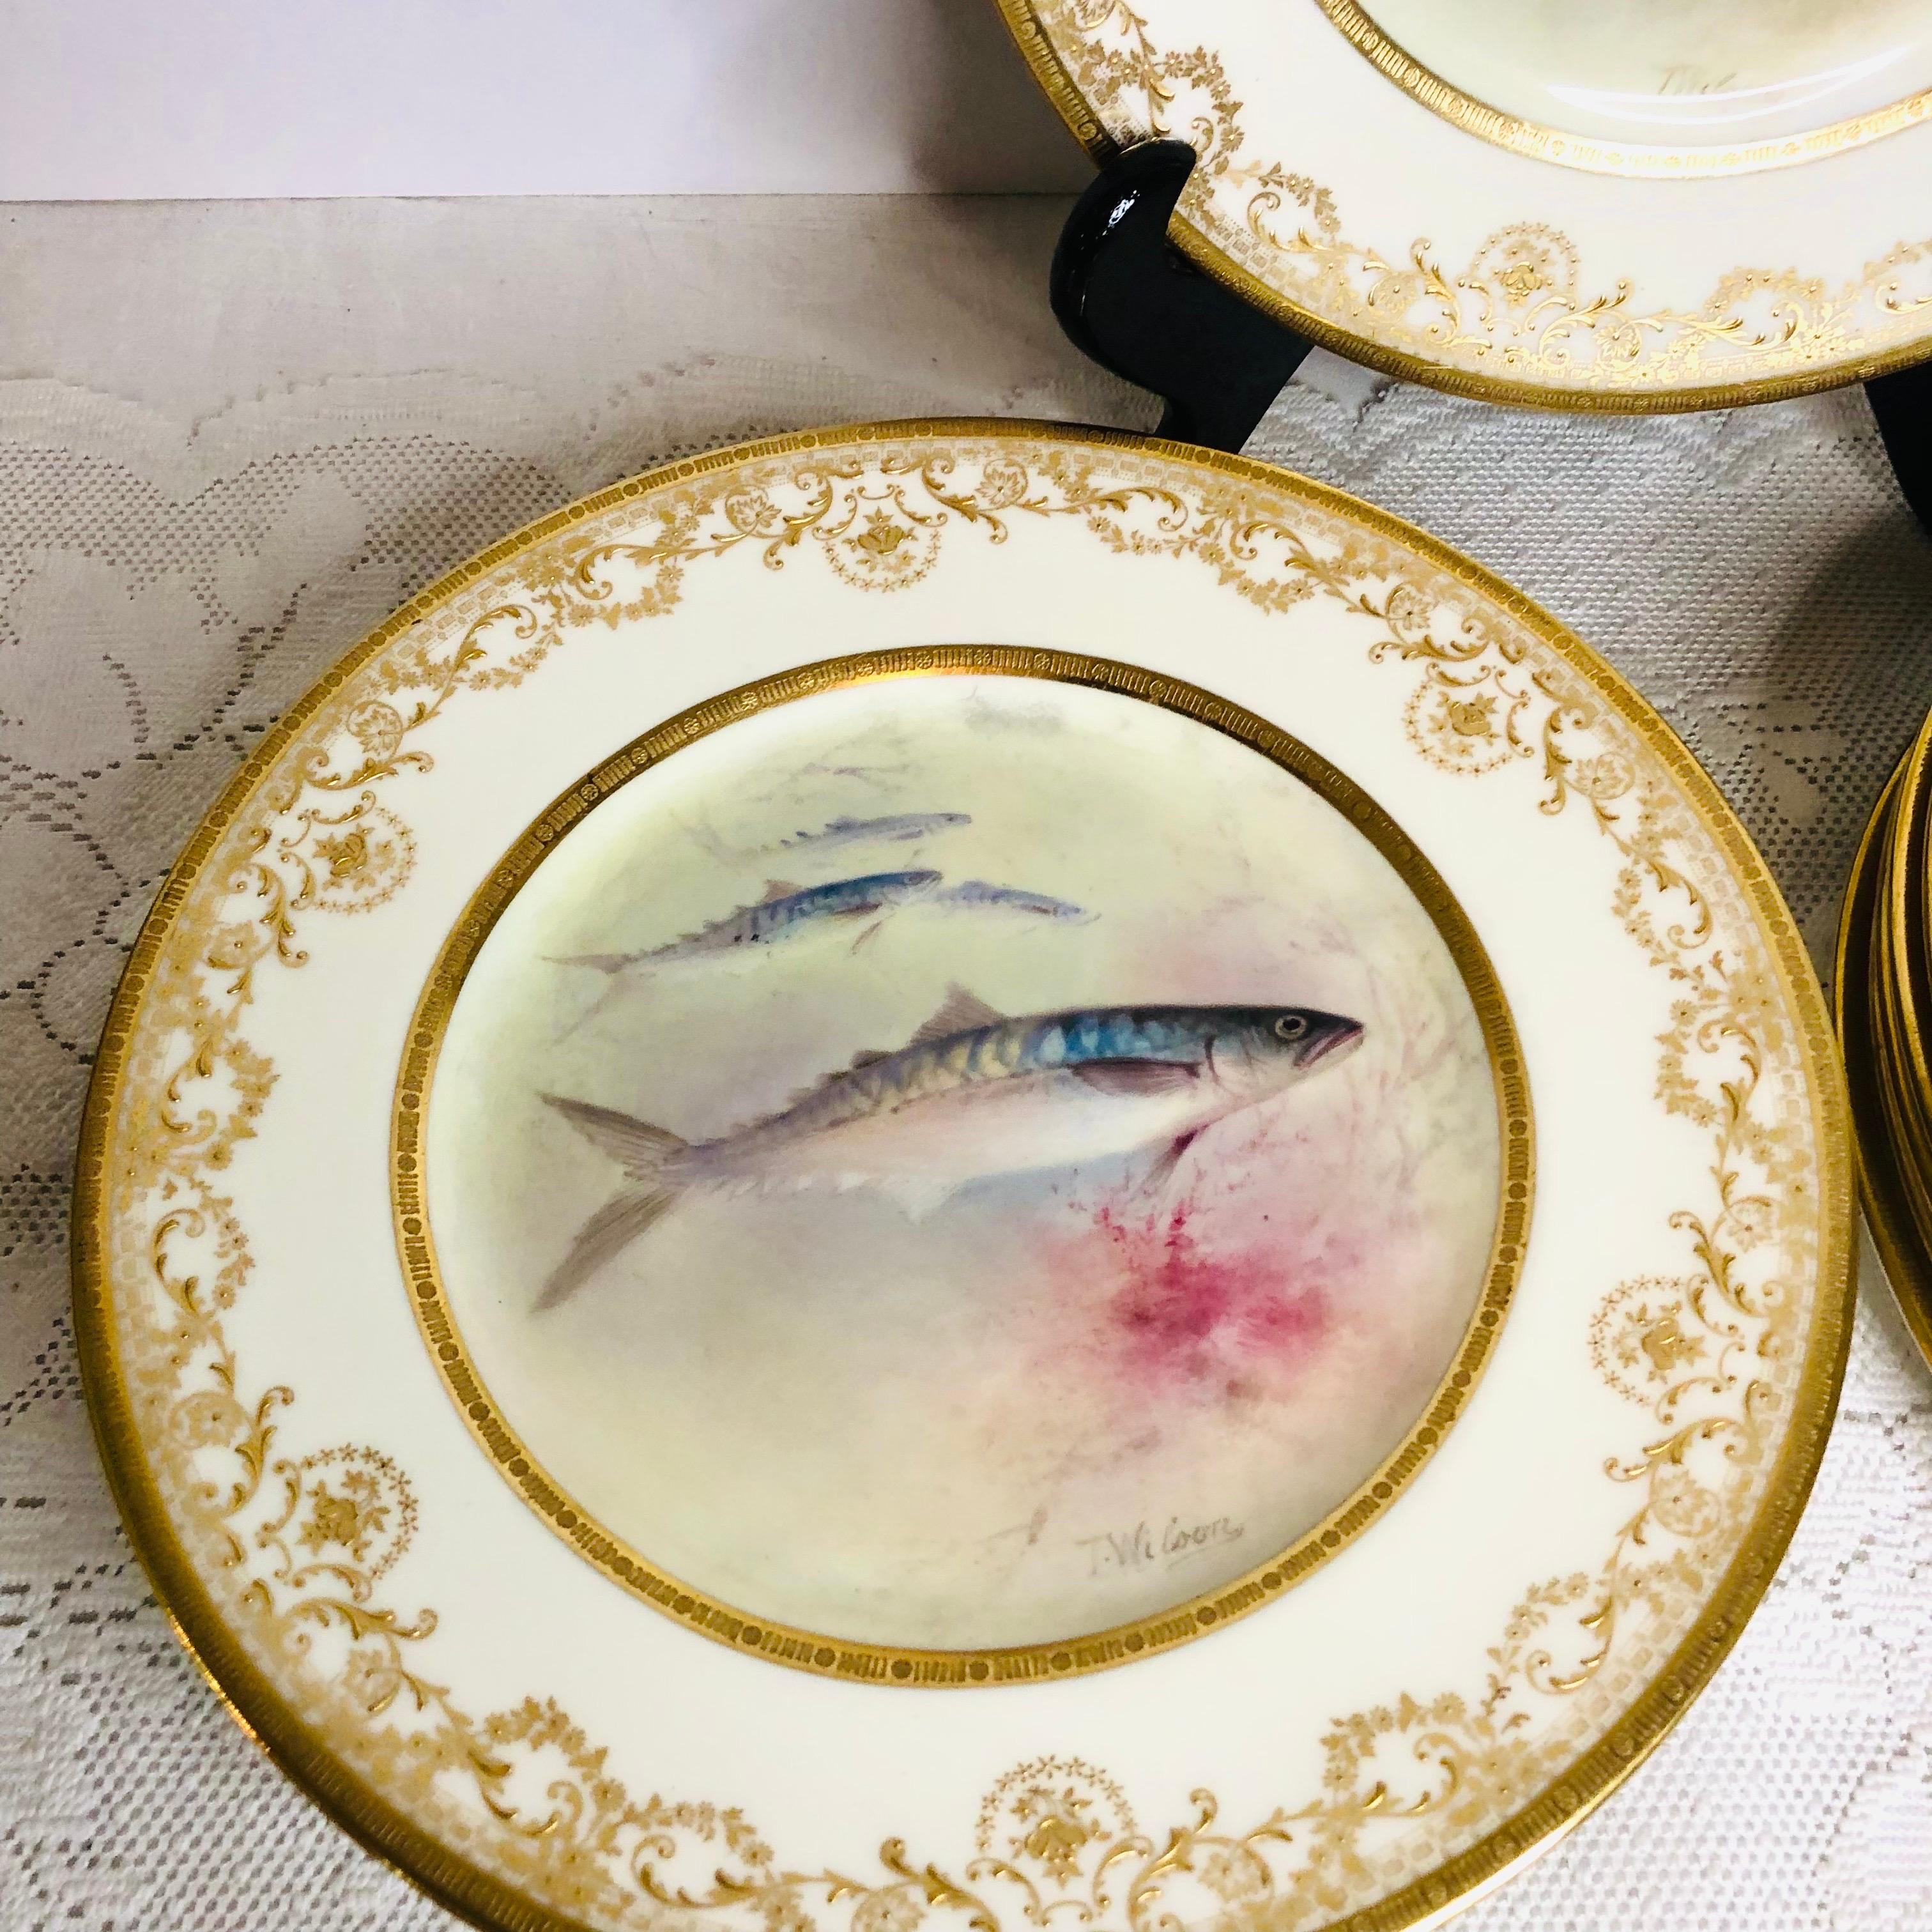 English Set of 12 Royal Doulton Fish Plates Each Hand Painted with Different Fish 